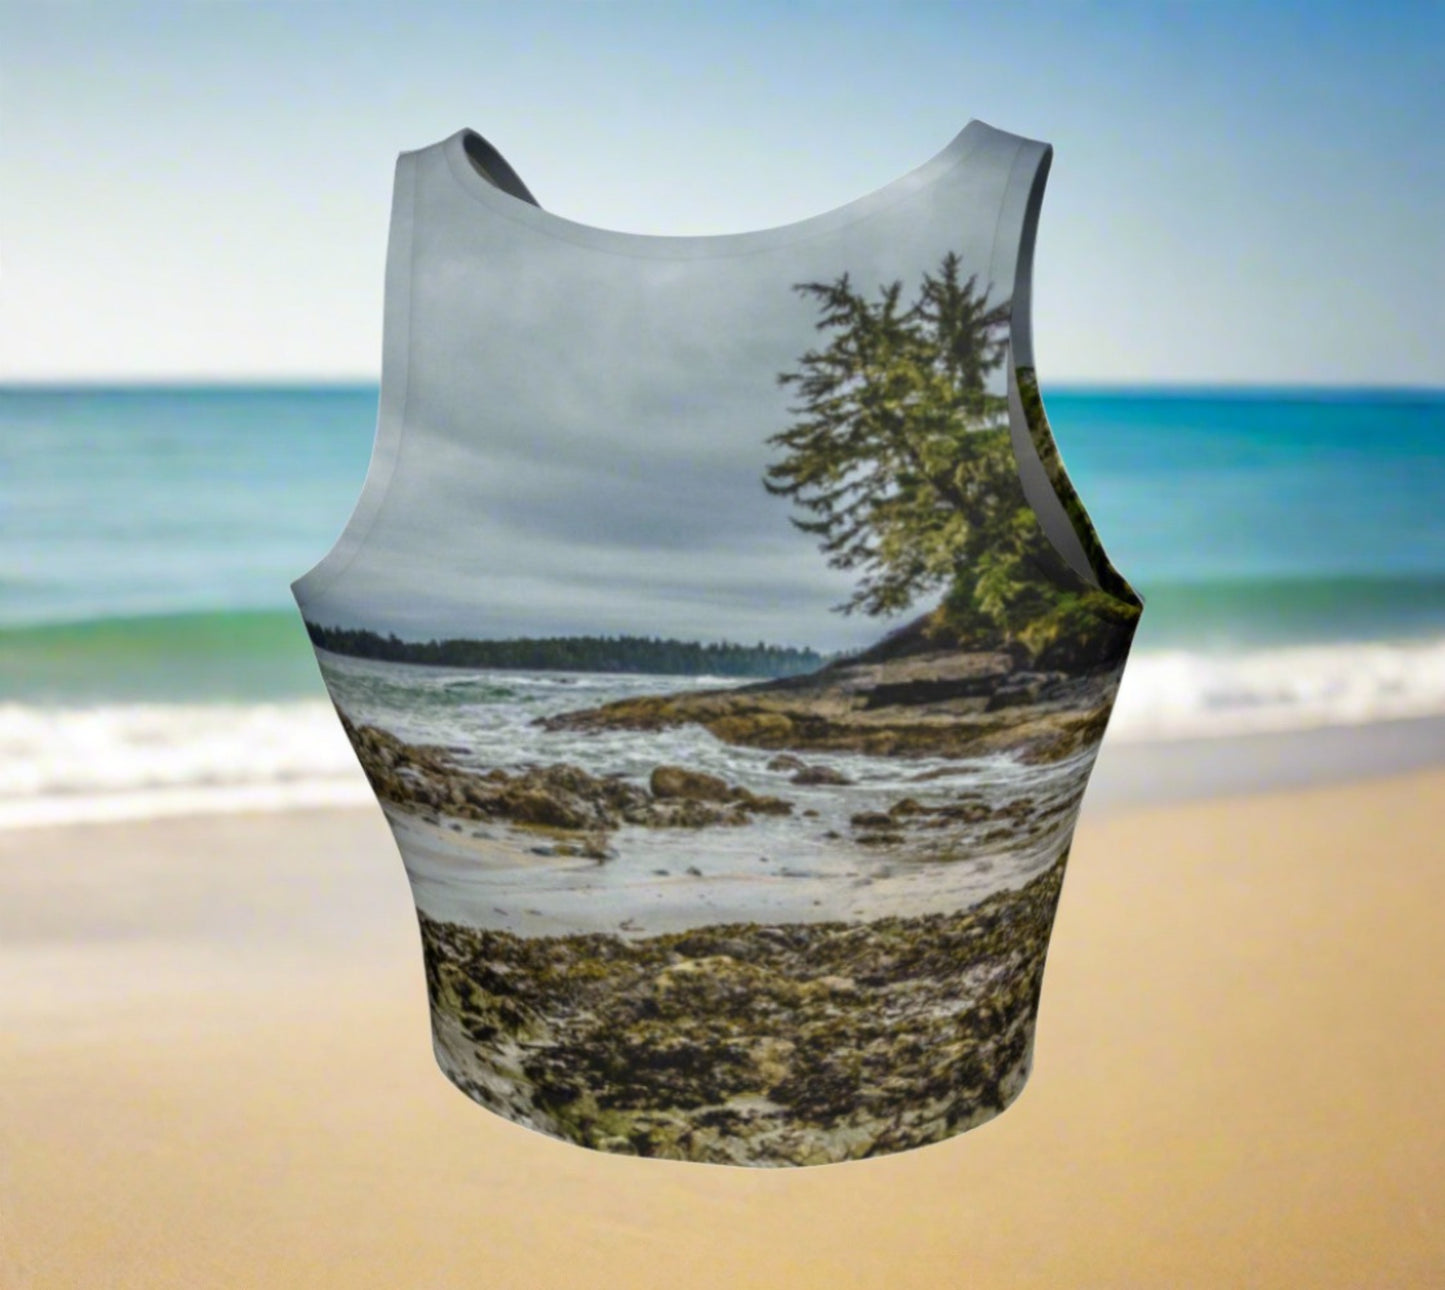 McKenzie Beach Athletic Crop Top  McKenzie Beach artwork by Roxy Hurtubise   Made to move with you!  Wear for your daily workouts, yoga, beach volleyball or as a bathing suit top!  Your Van Isle Goddess athletic crop top pairs up with our yoga or classic leggings and capris. Crop tops also look great with shorts, mini shorts, skirts fitted or flared.